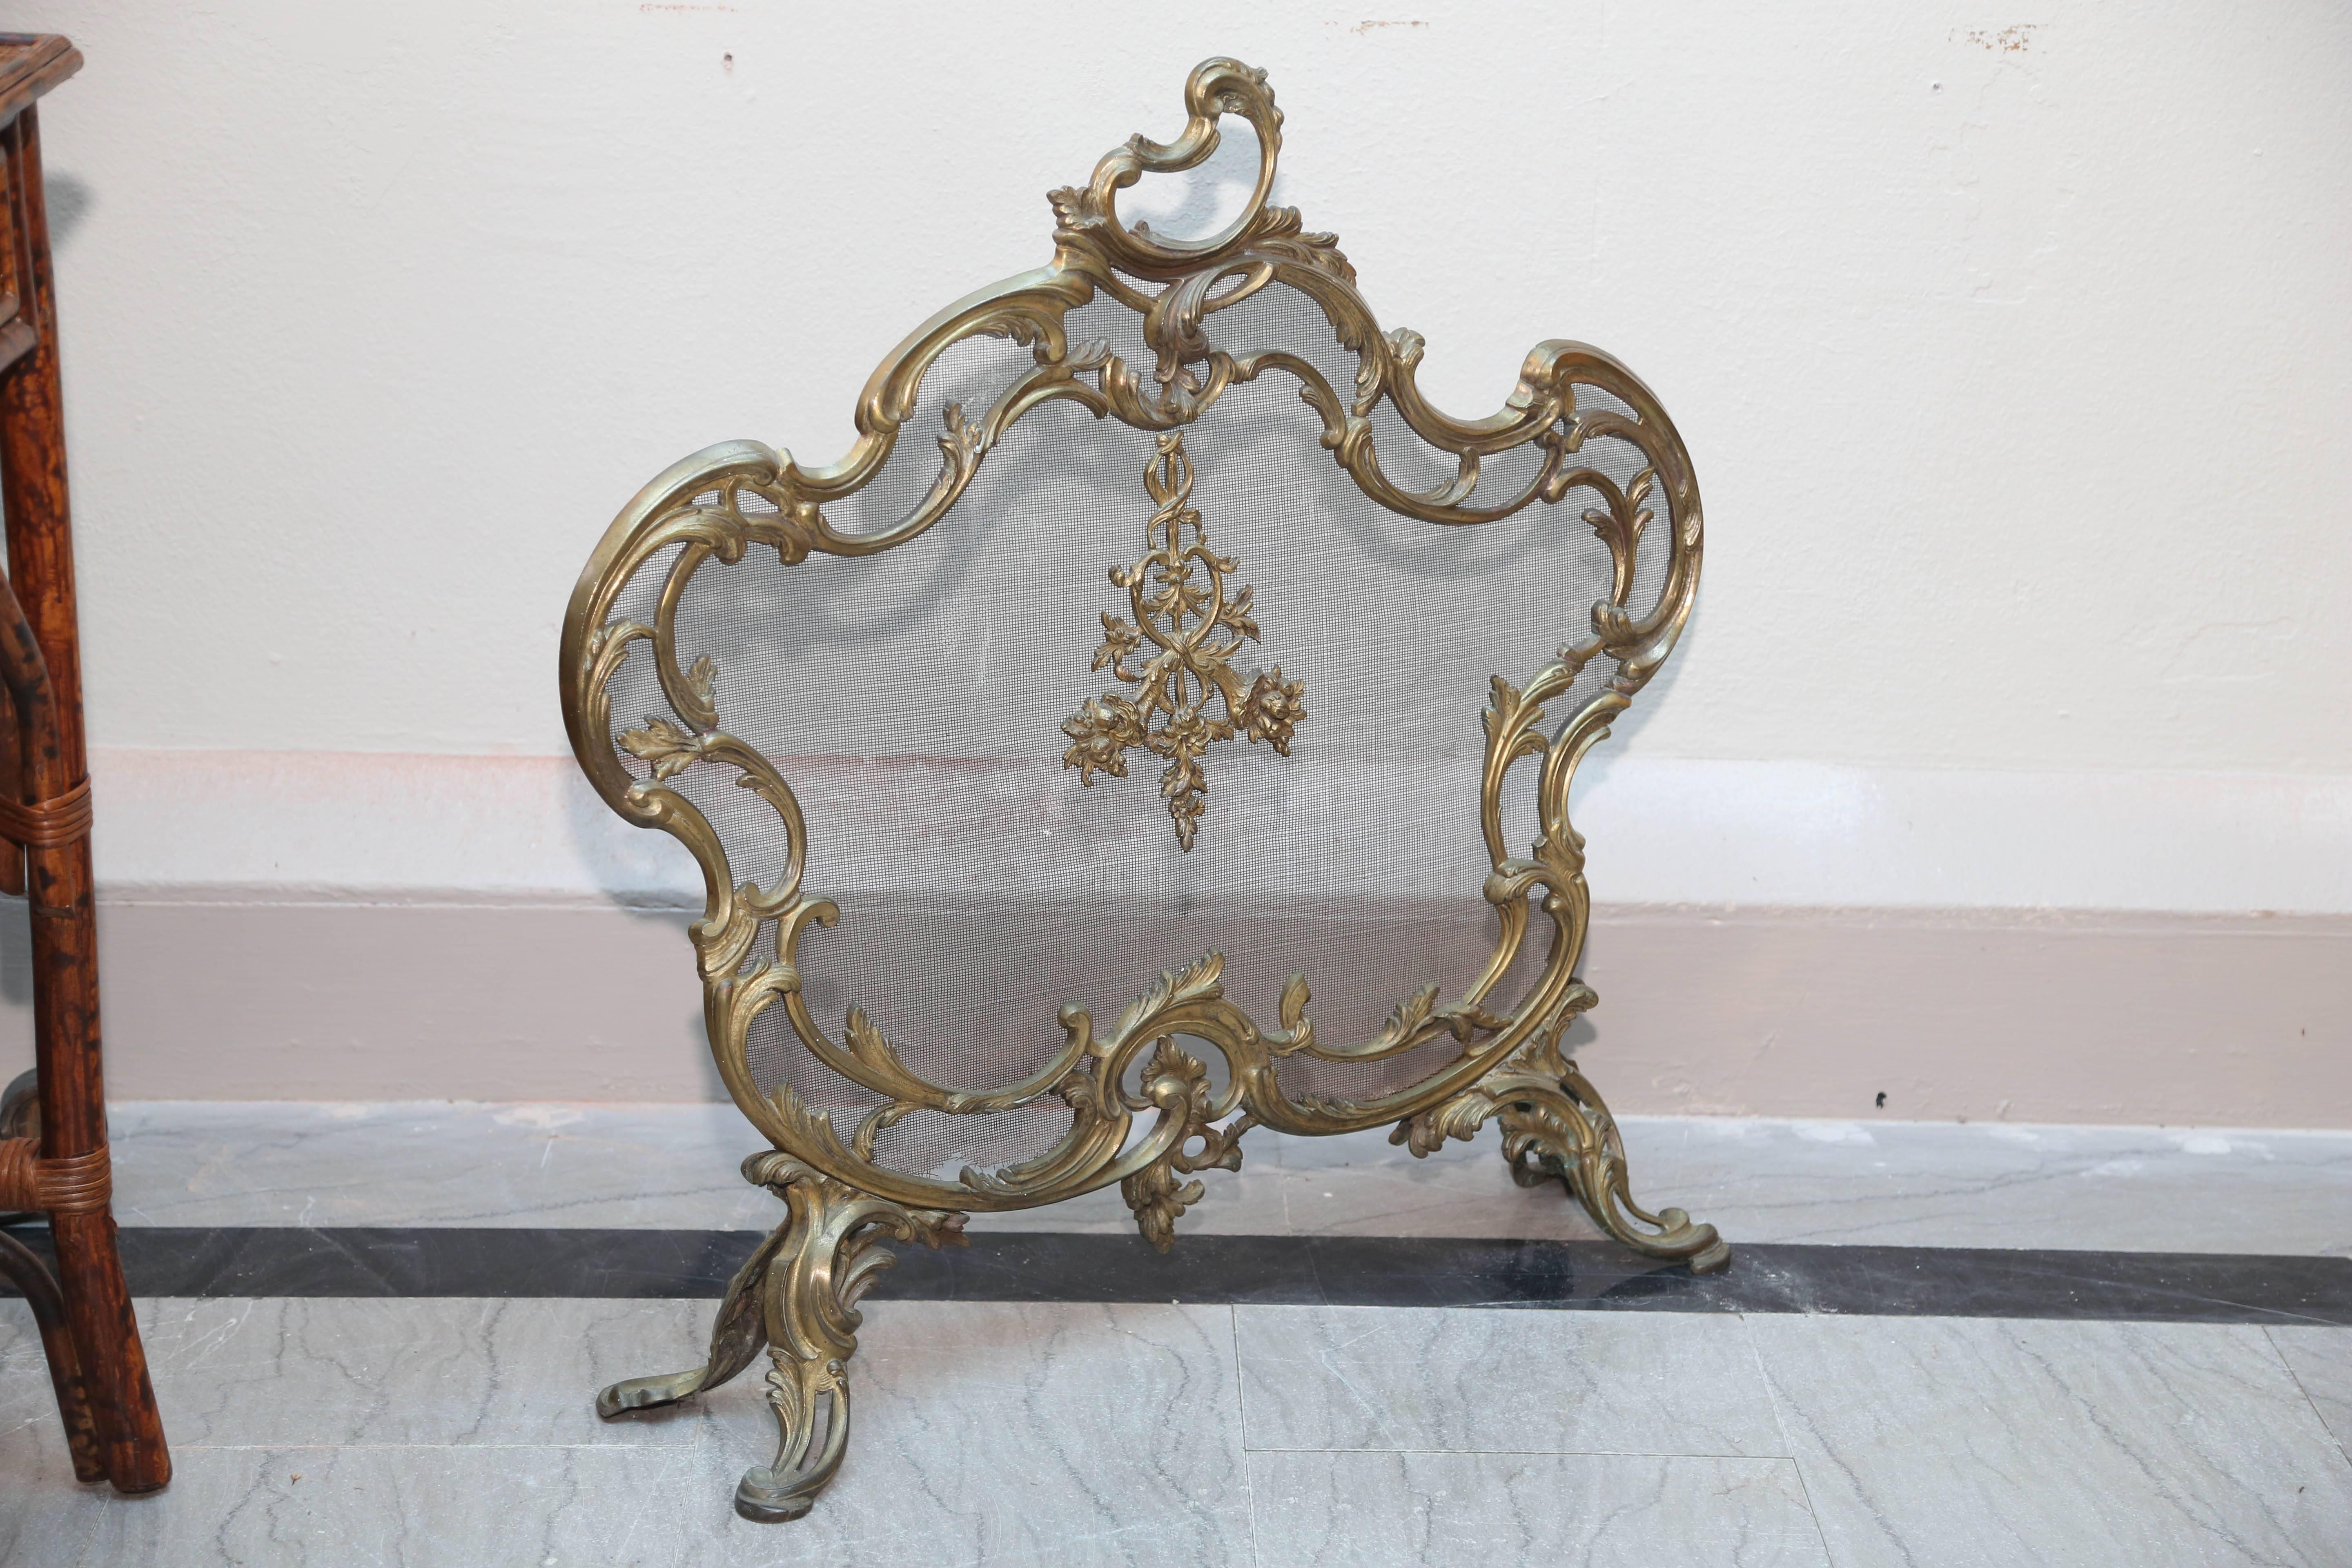 Artistic brass/bronze framework of heavy weight and superb quality.